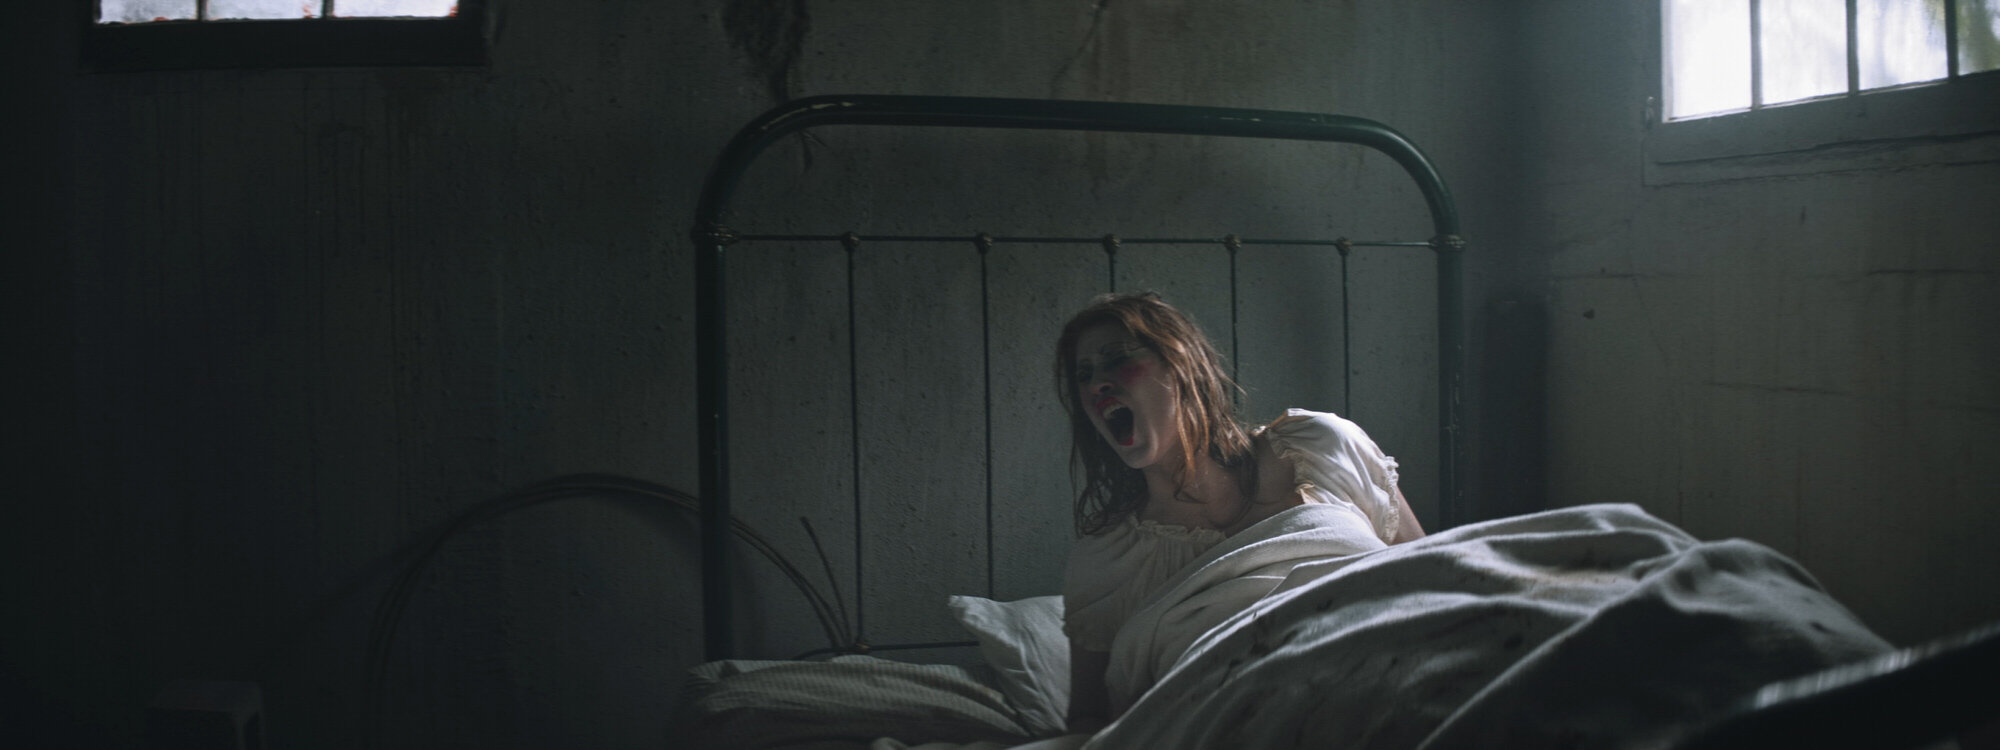 The Altruist - Woman yells from bed